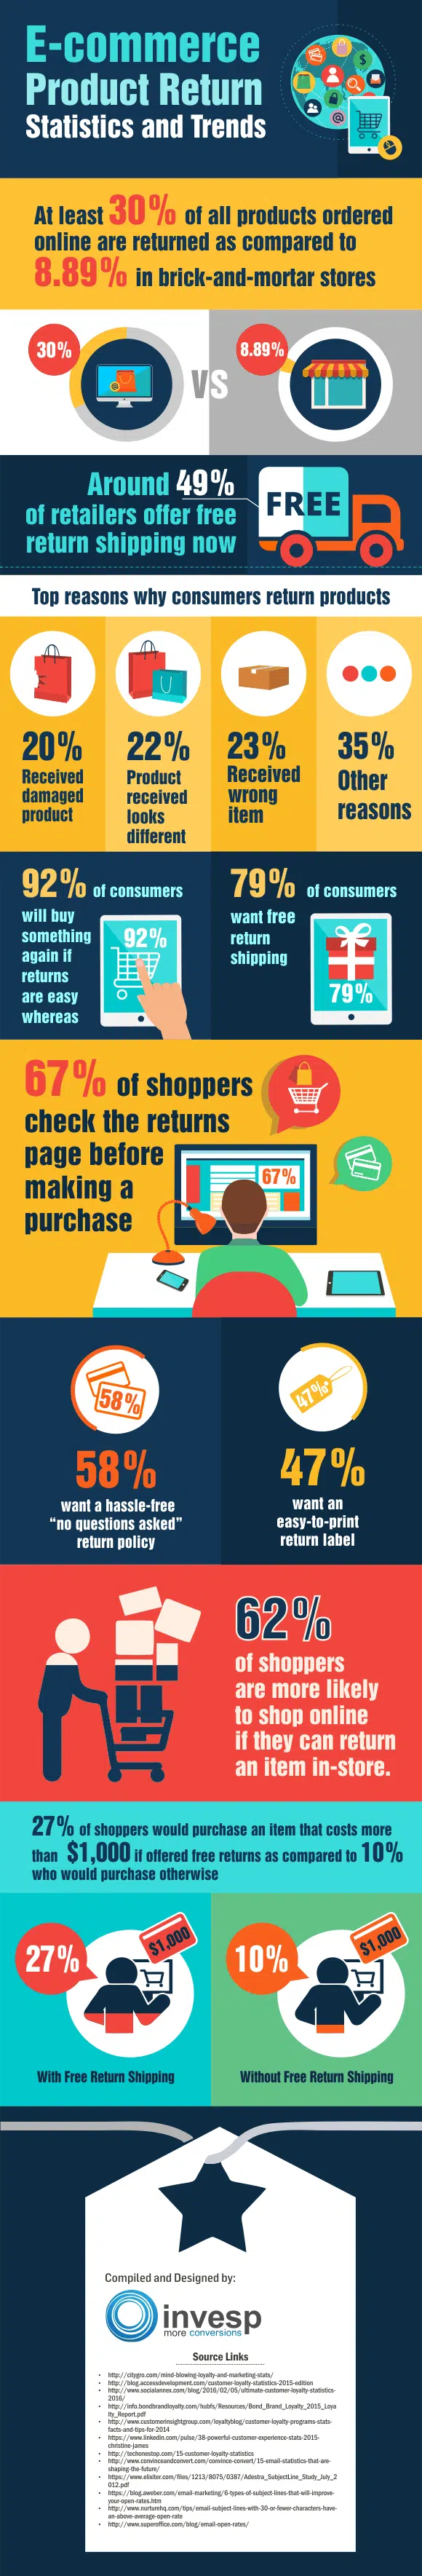 E-commerce Product Return Rate – Statistics and Trends [Infographic] -  Invesp